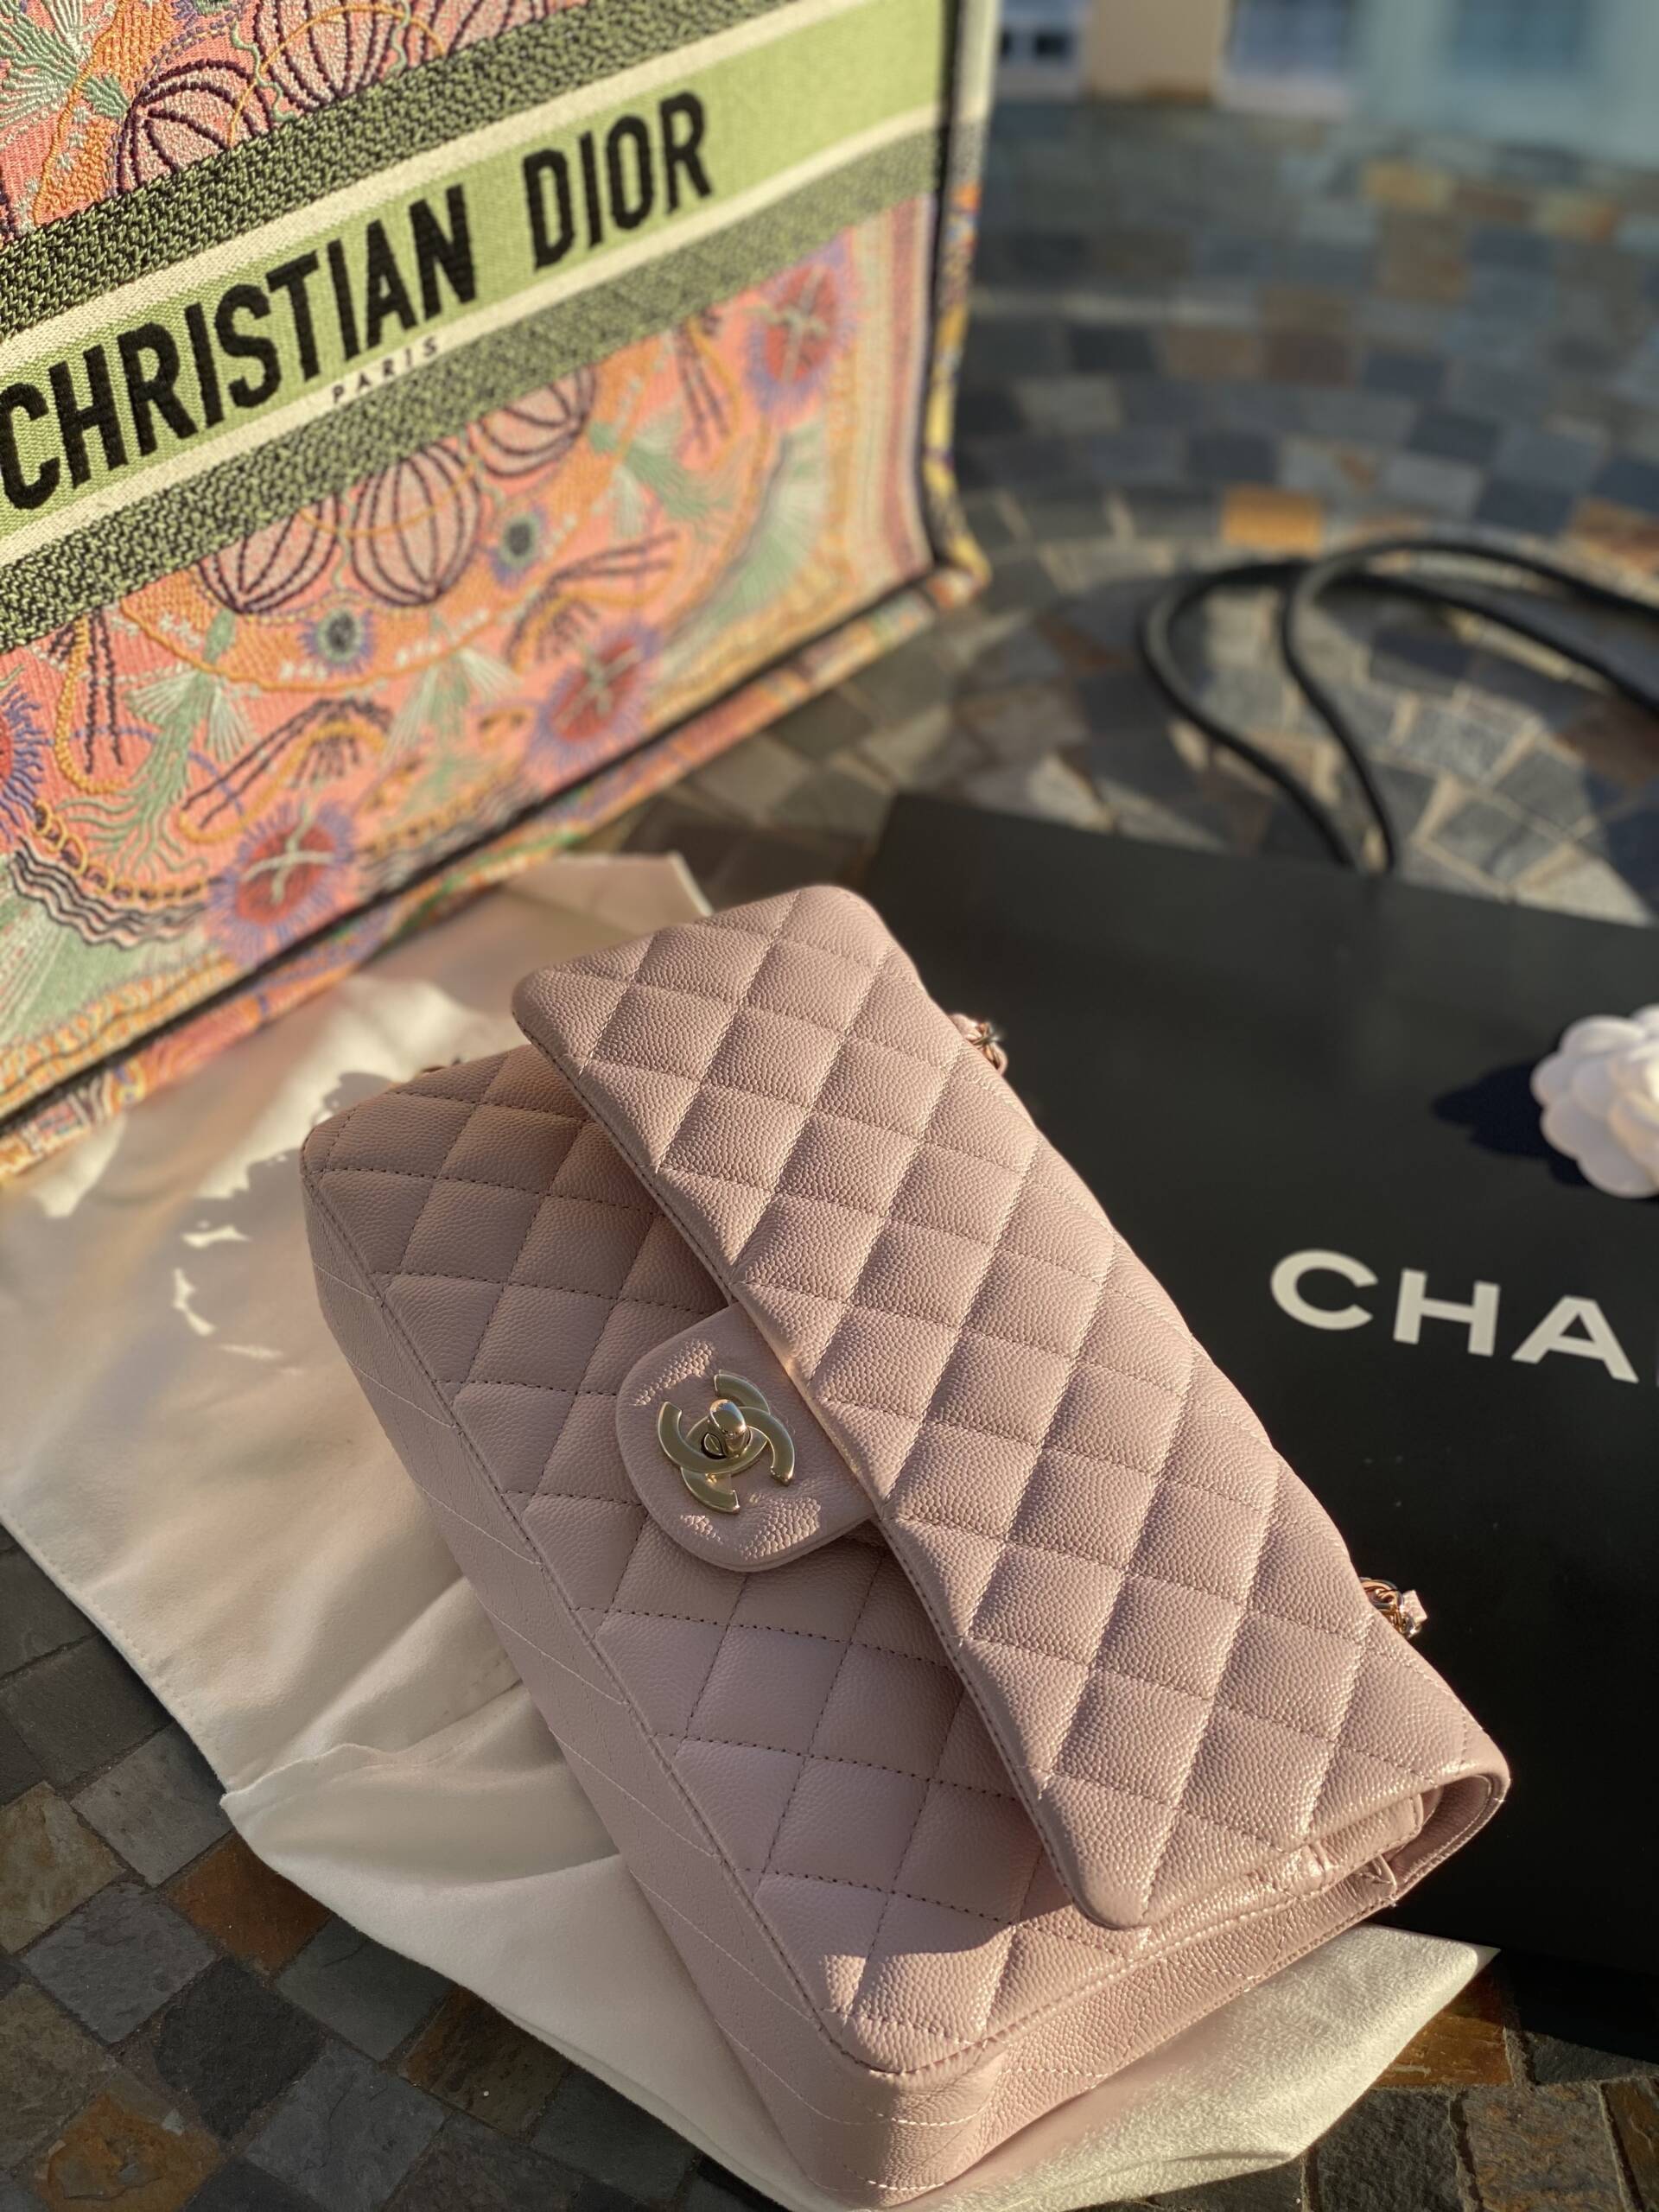 Chanel Reveal: The 21S Classic Flap that Makes My Heart Sing - PurseBop